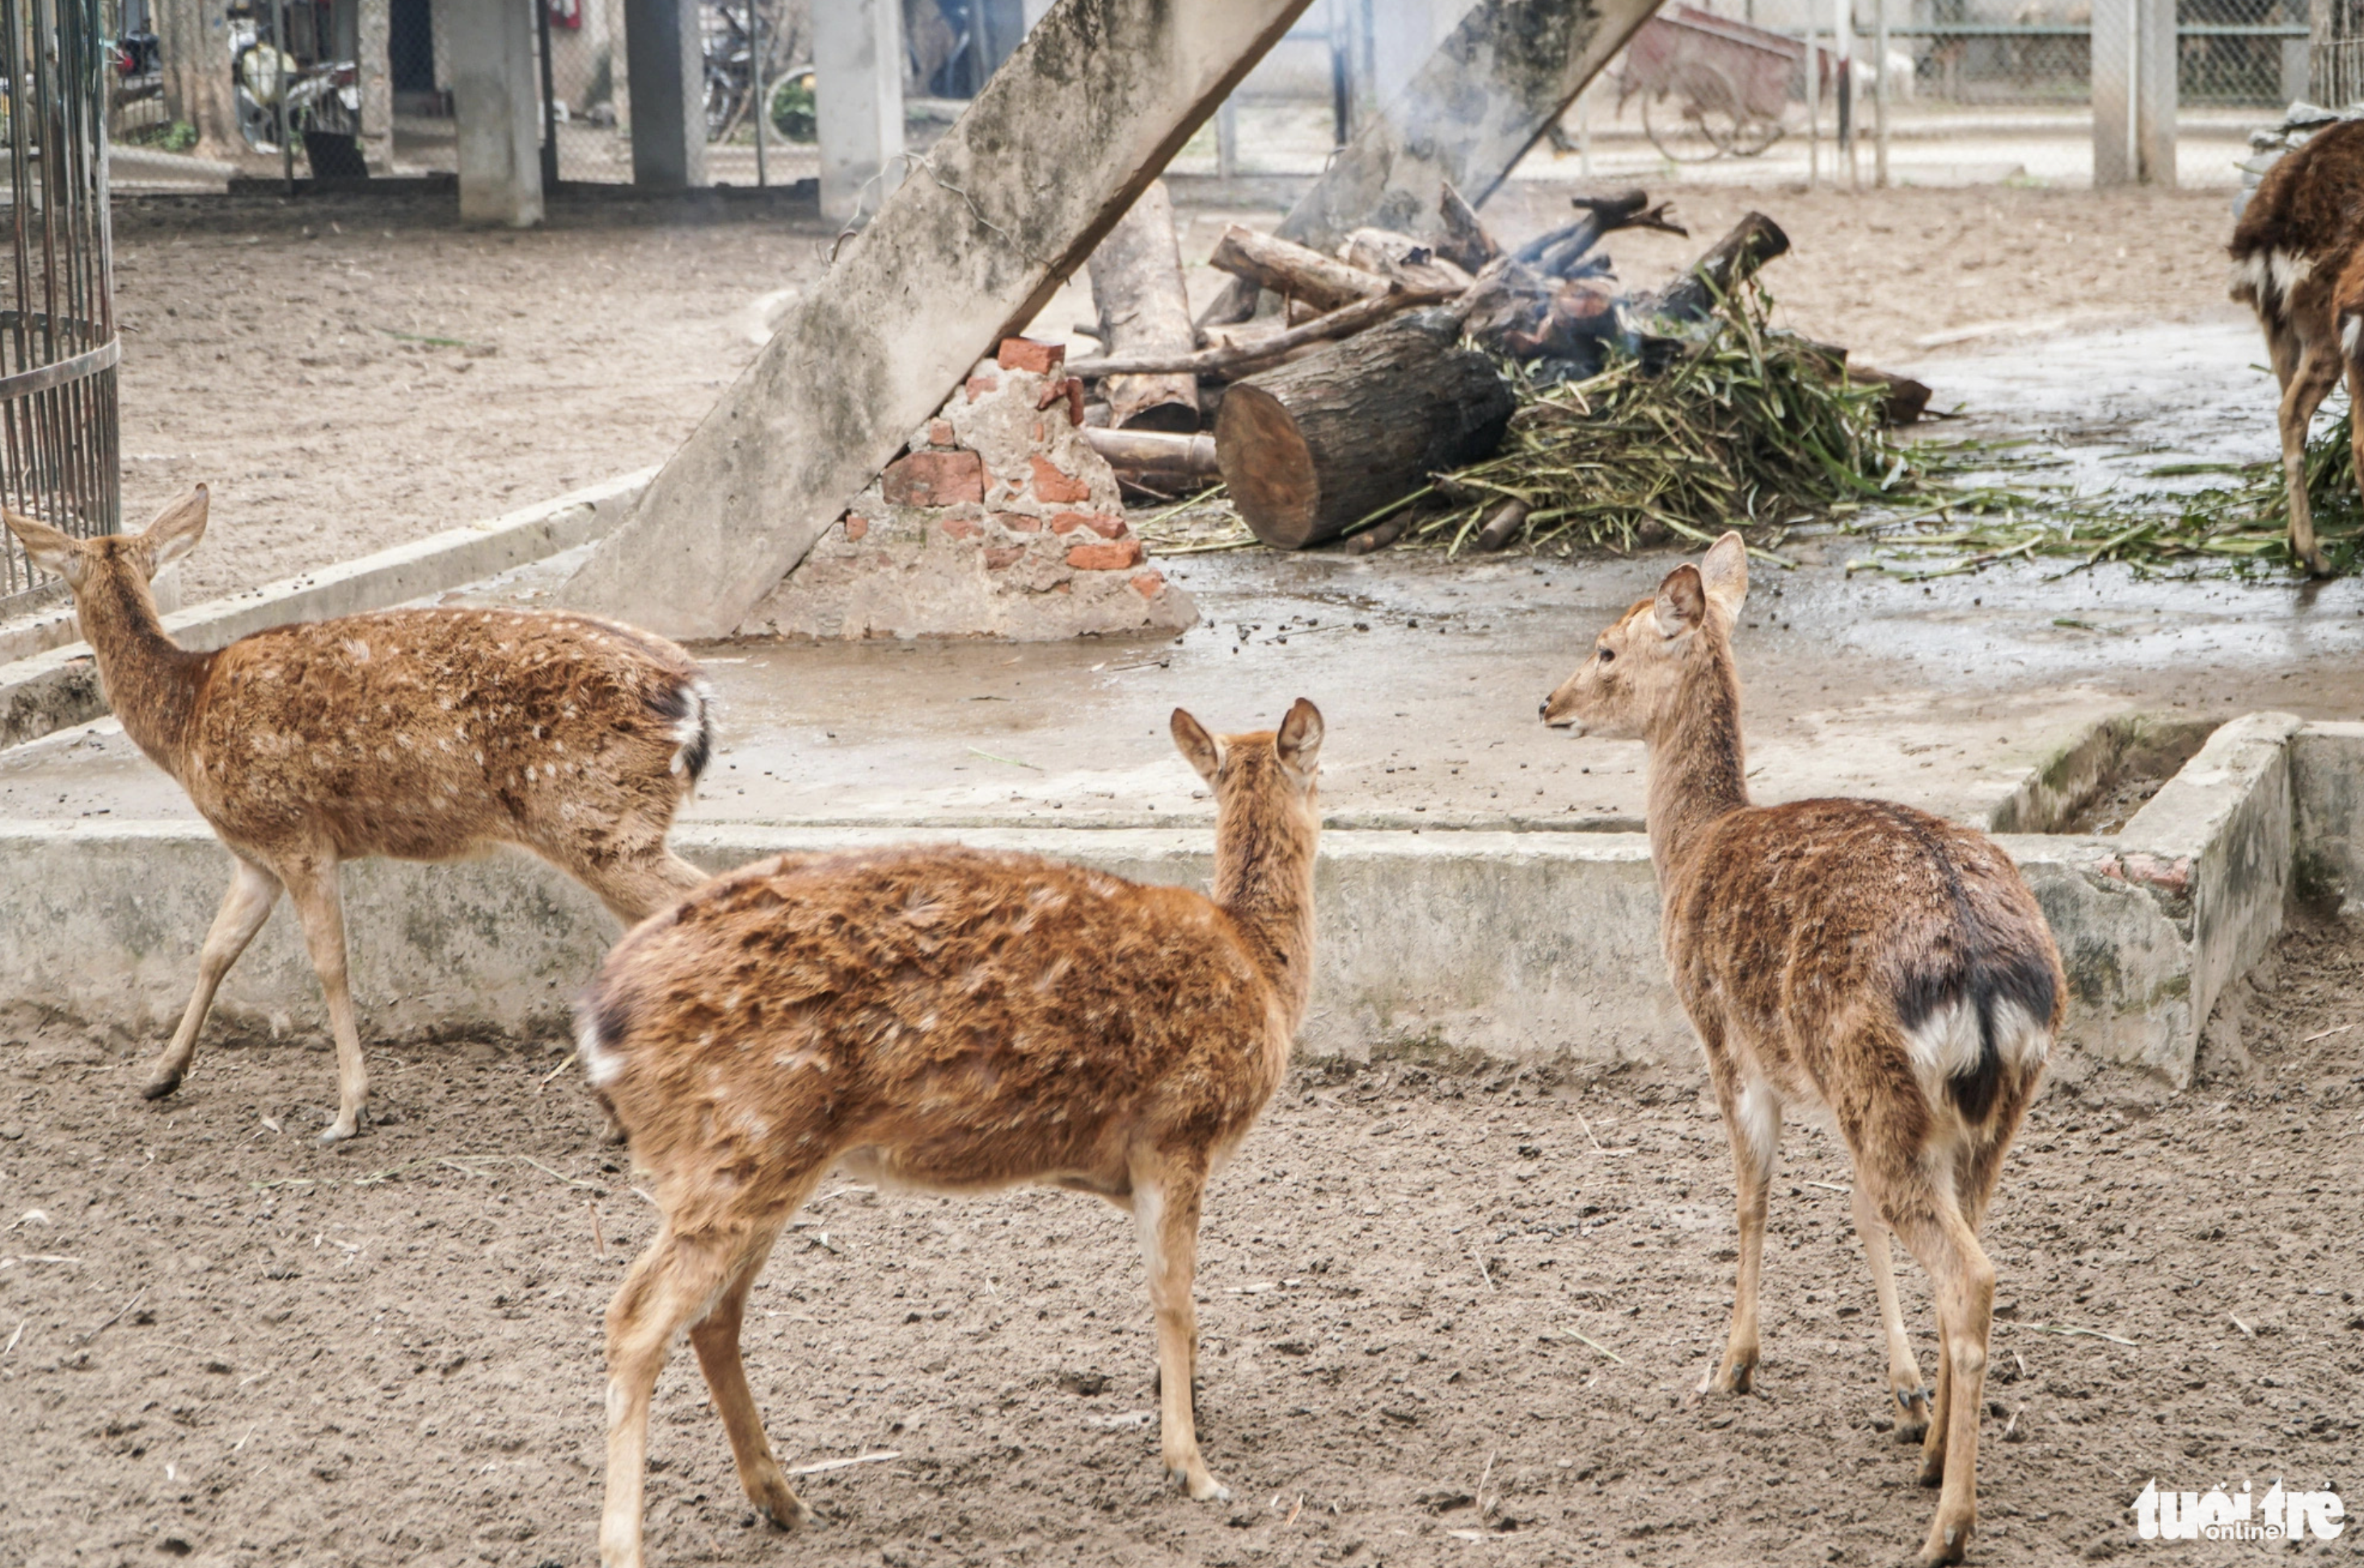 Zookeepers start fires to help deer get the heat. Photo: Pham Tuan / Tuoi Tre